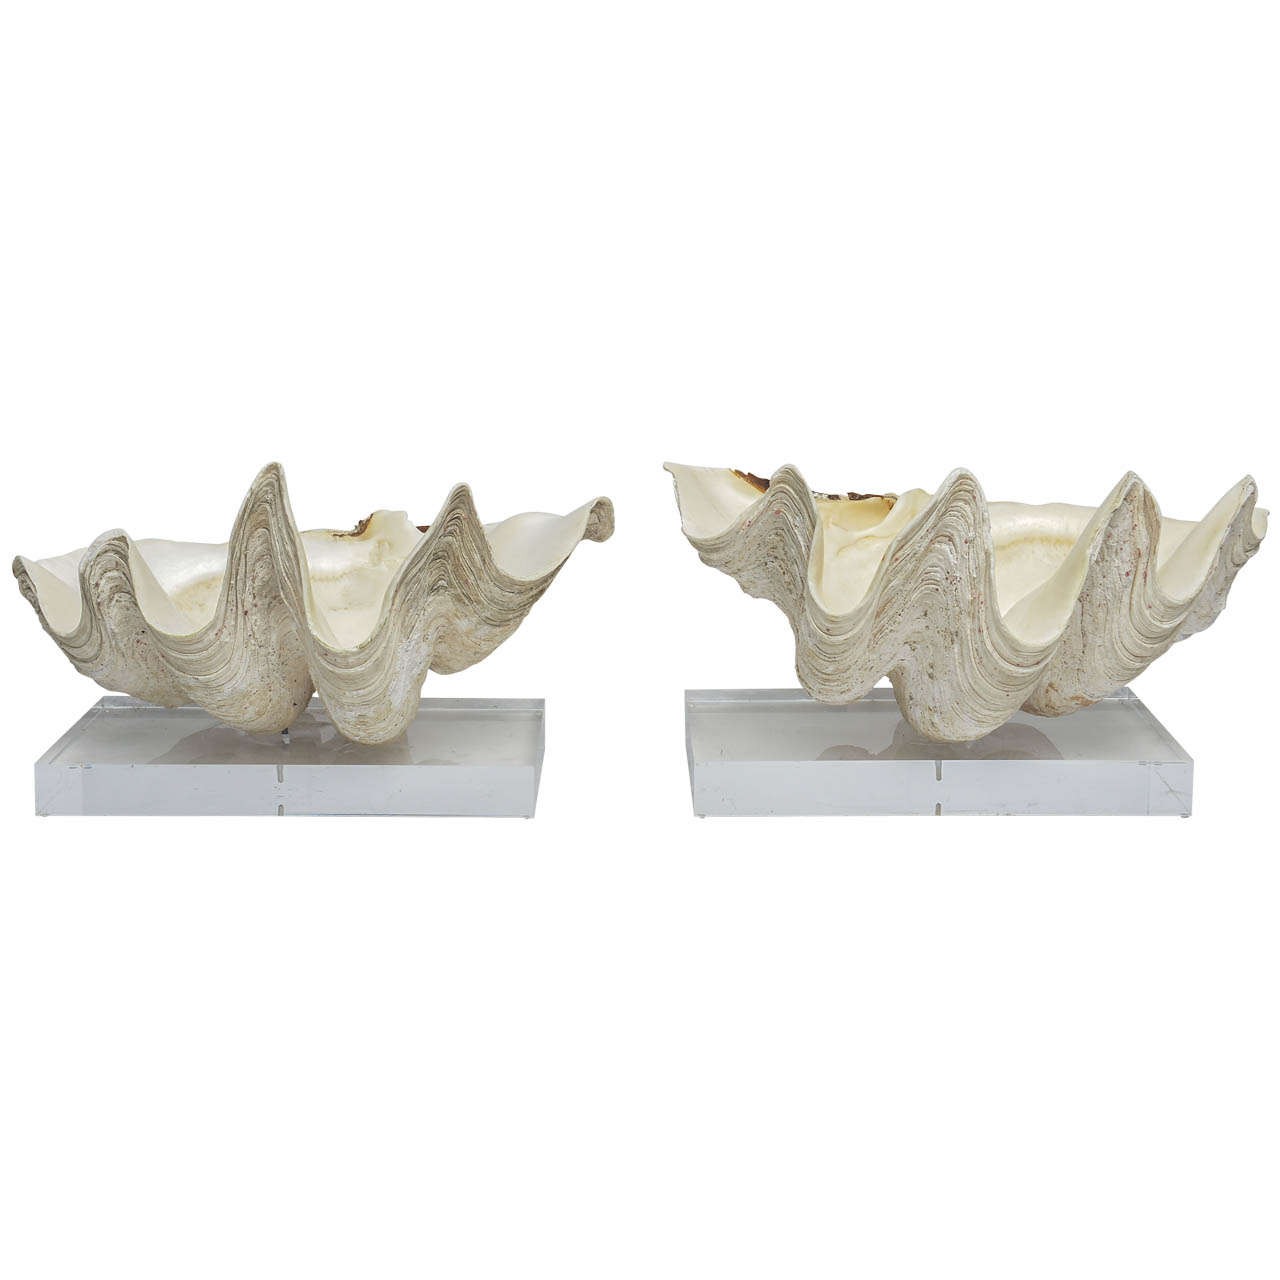 Pair of Lucite-Mounted Giant Clam Shells